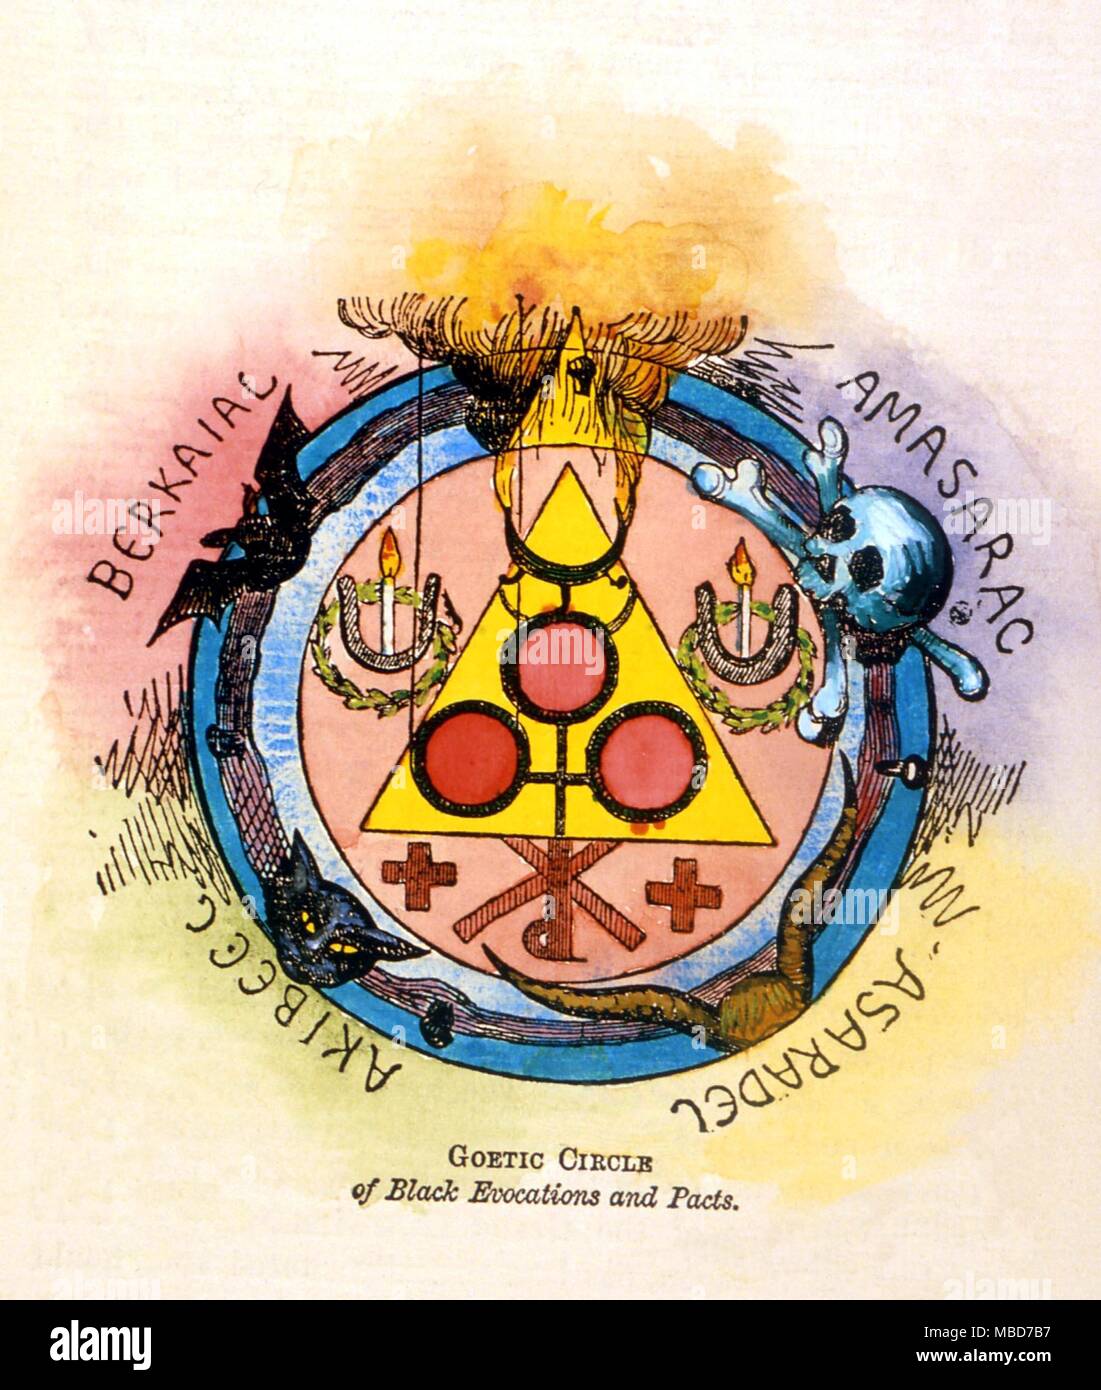 Goetic circle according to the magician, Eliphas Levi. From a hand-coloured 1896 English edition, 'Transcendental Magic' translated by A. E. Waite. Stock Photo